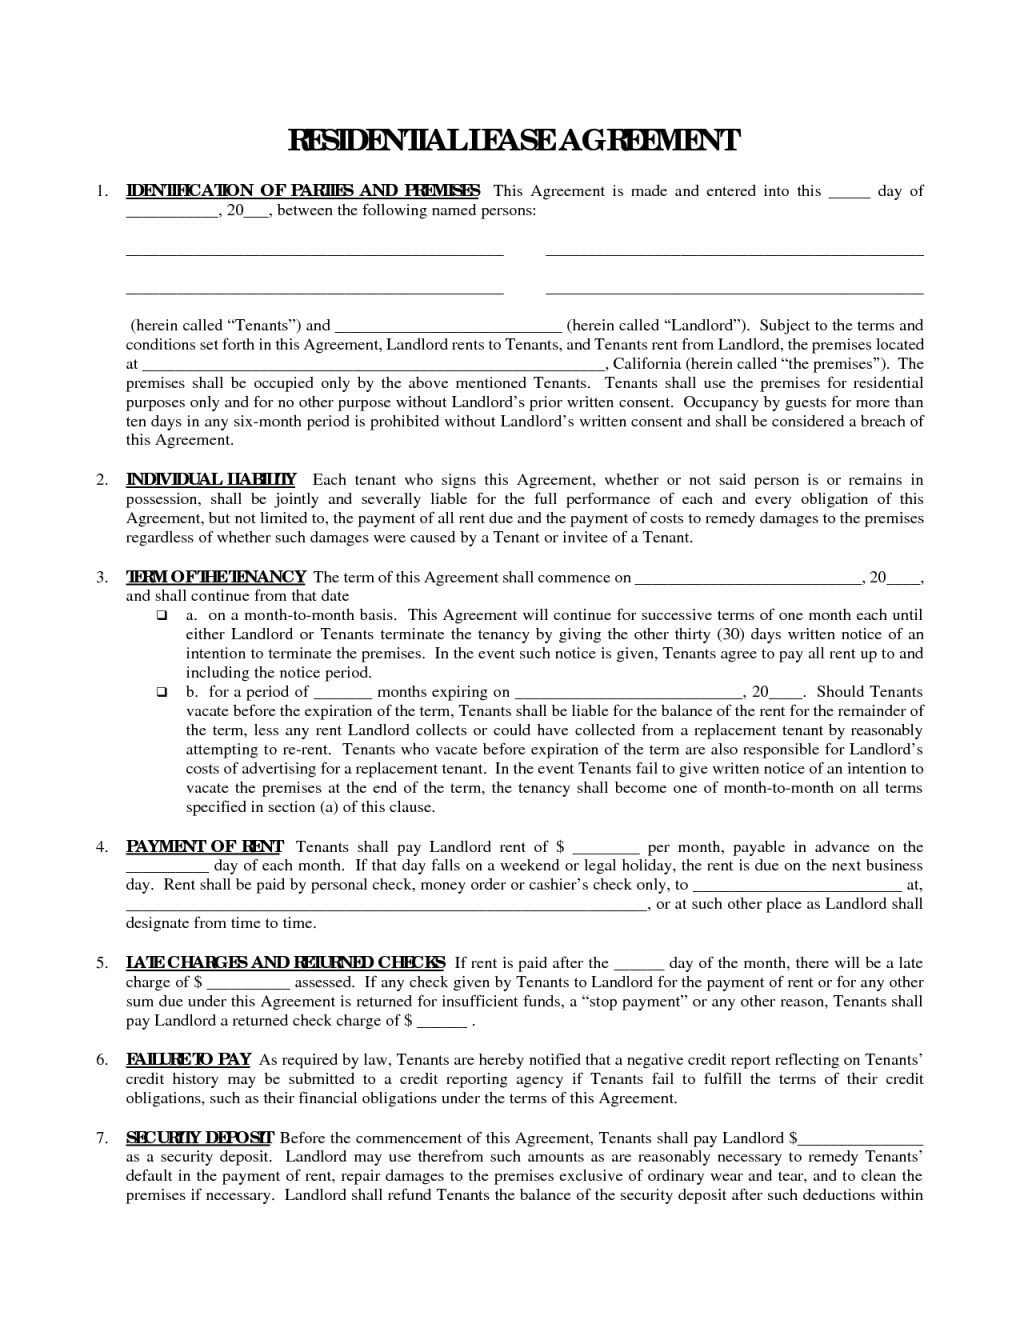 Residential Lease Agreement Doc Residential Lease Agreement Template Word Ataumberglauf Verband